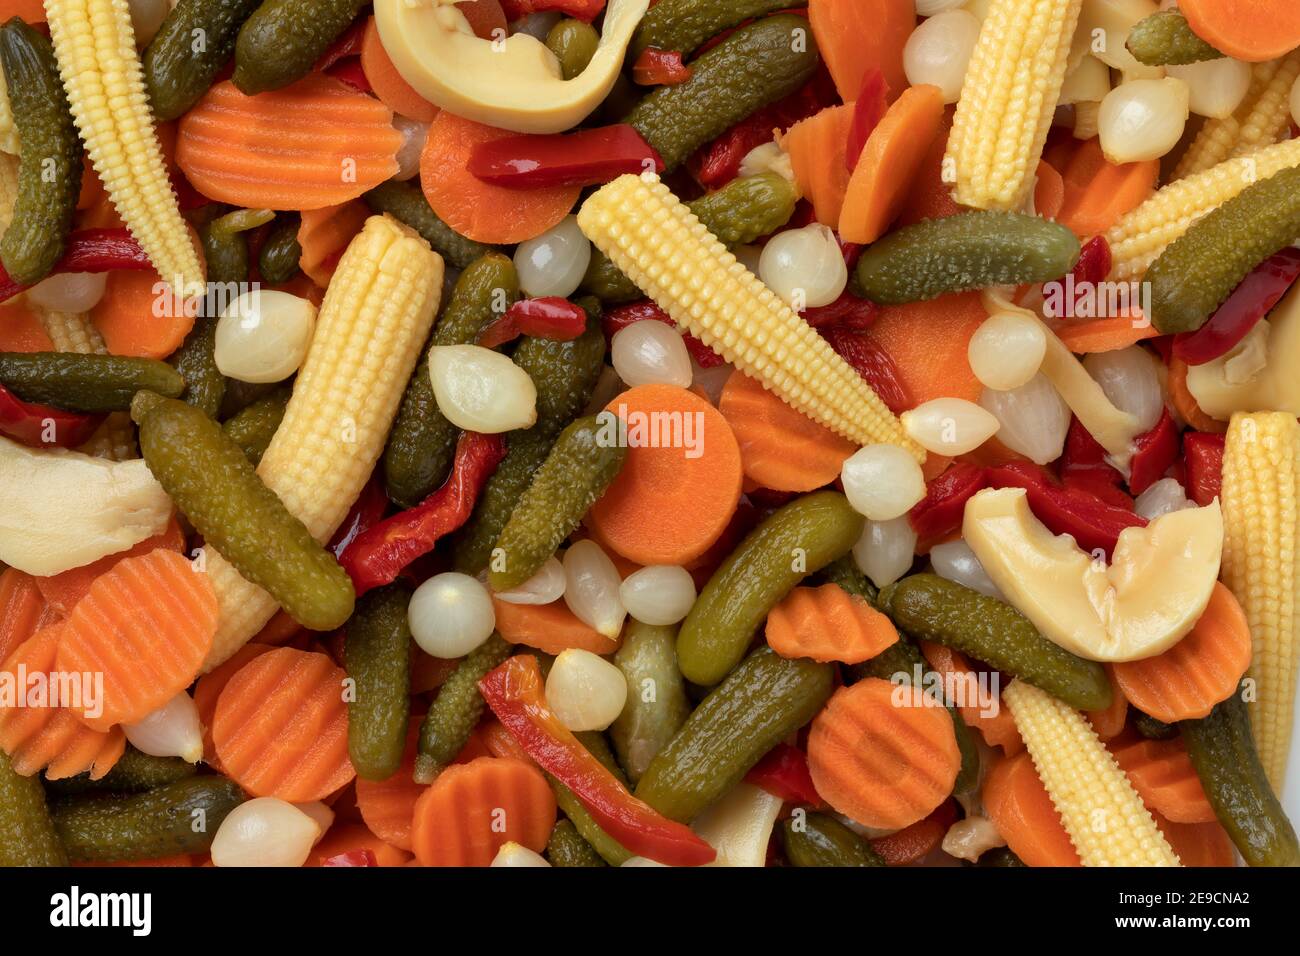 Colorful pickled vegetable mix close up full frame Stock Photo